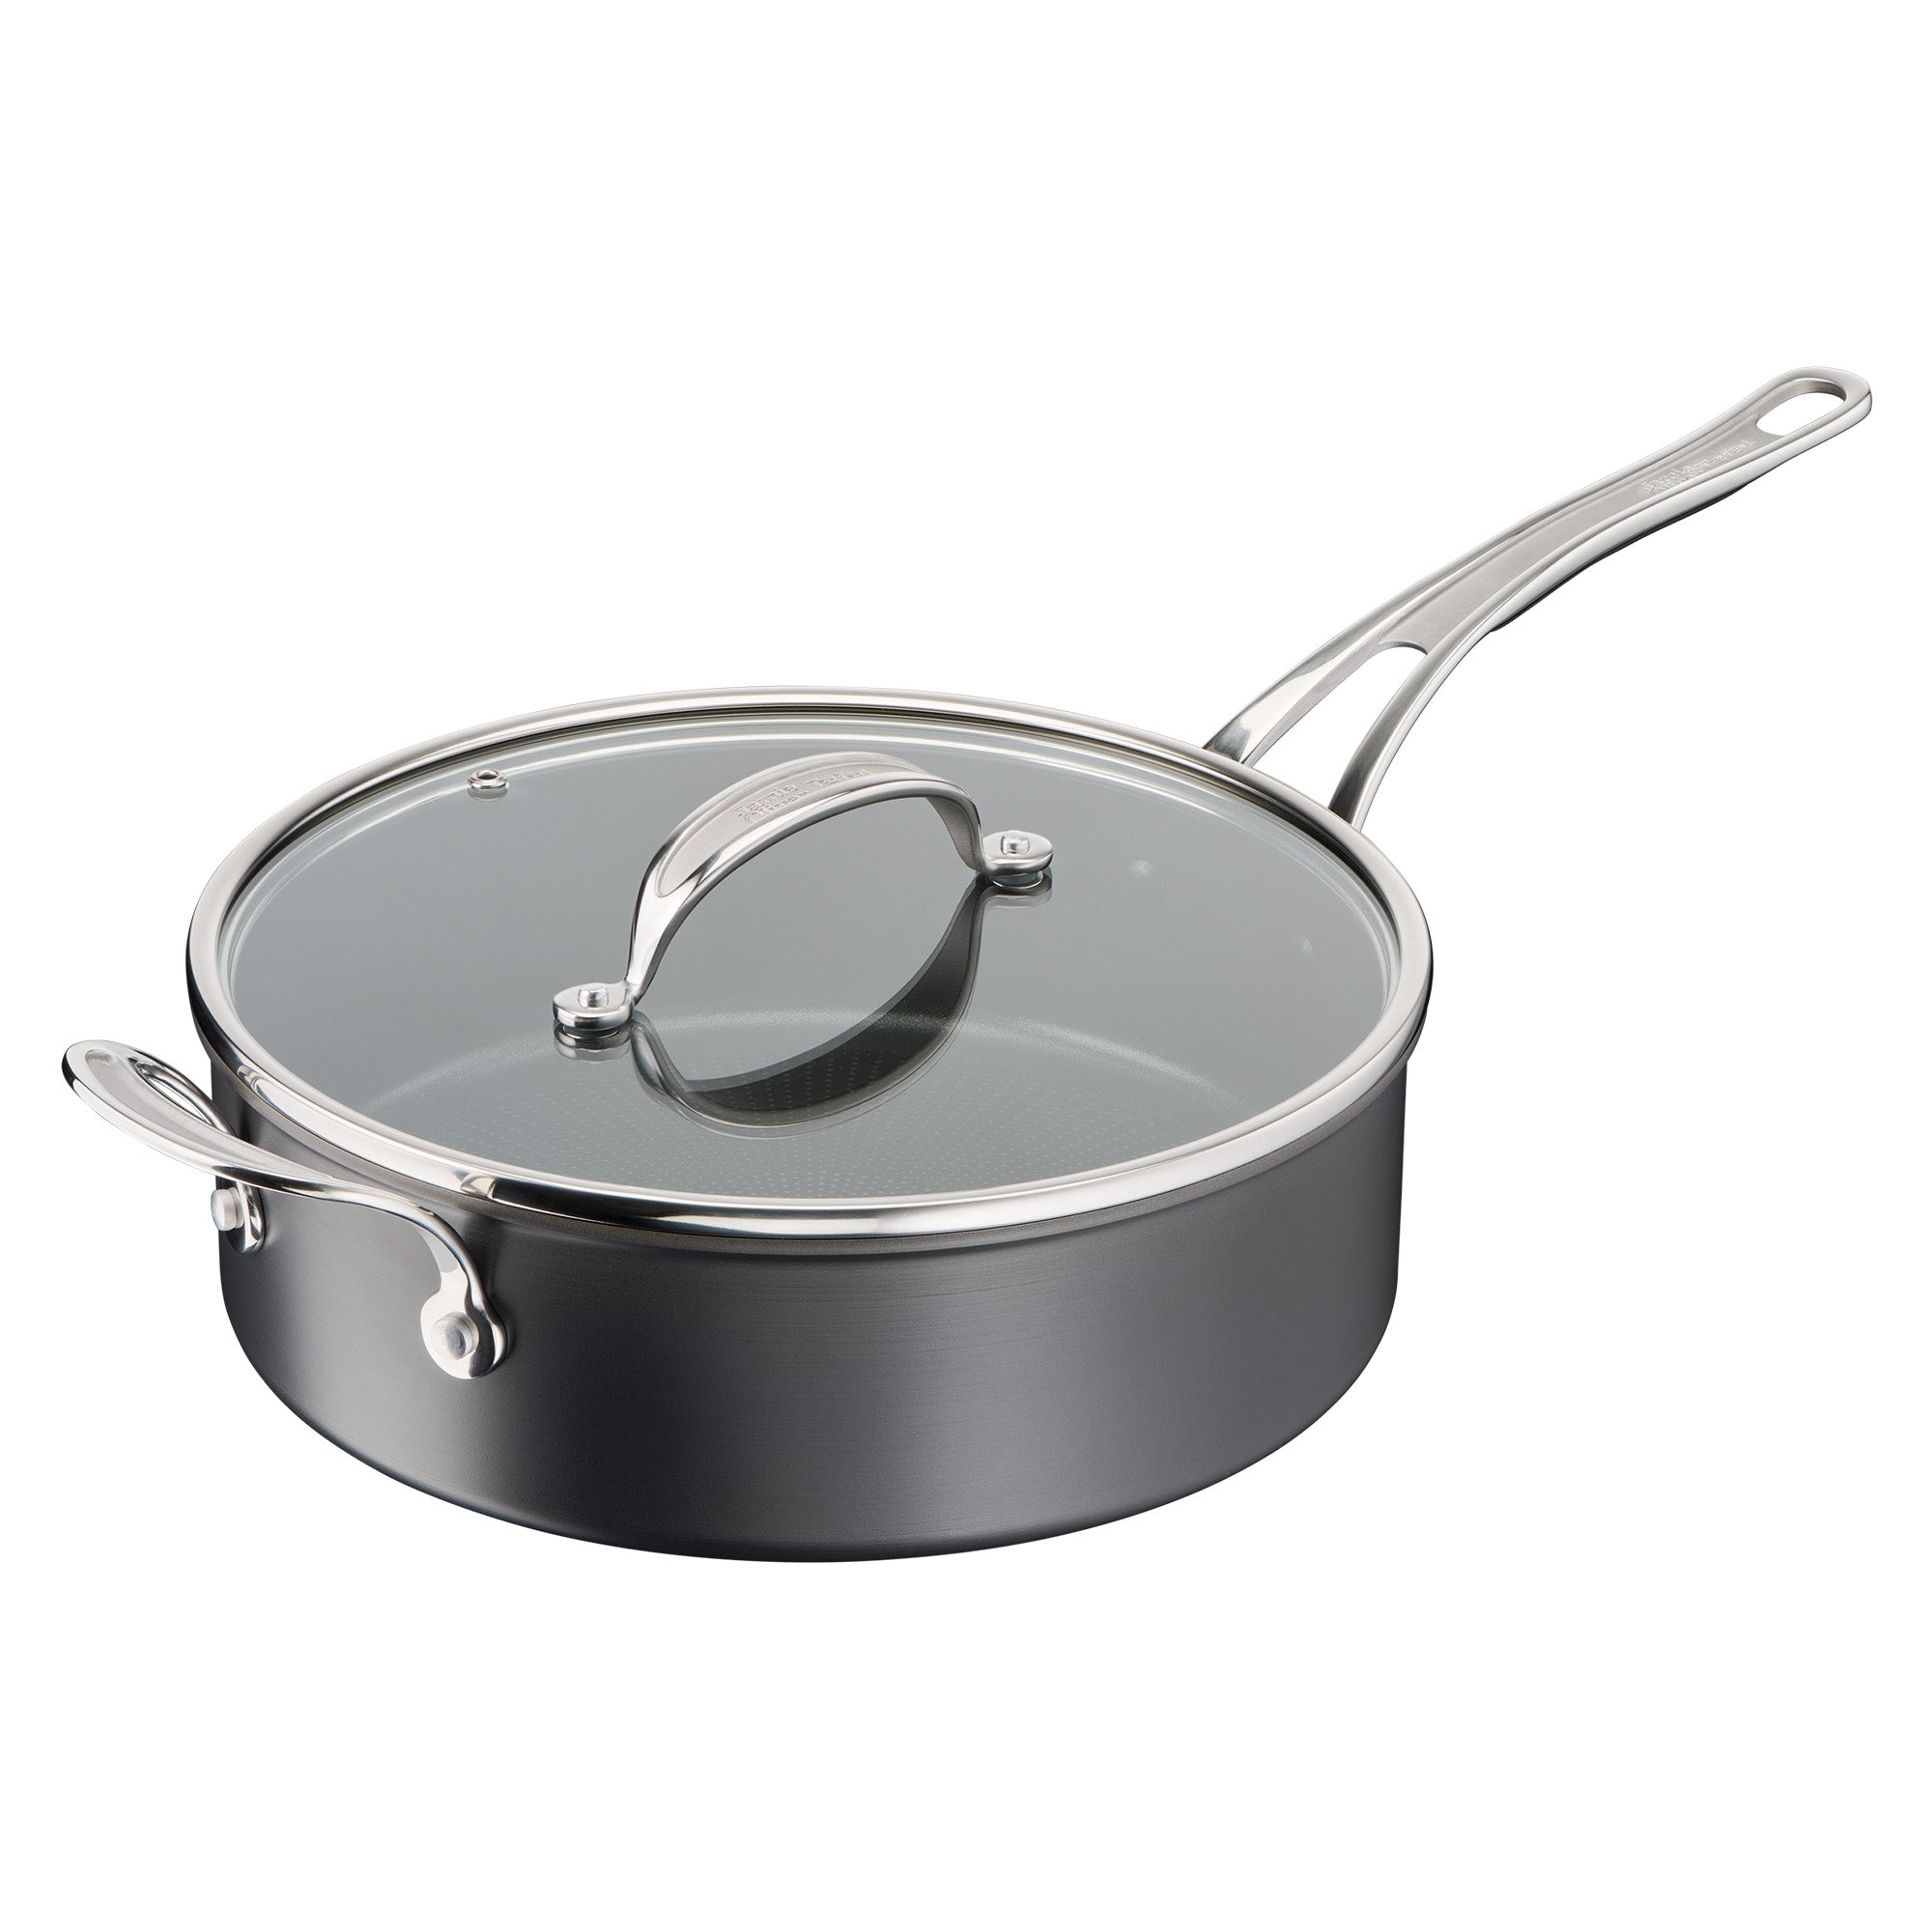 Jamie Oliver by Tefal Cooks Classic Non-Stick Induction Hard Anodised